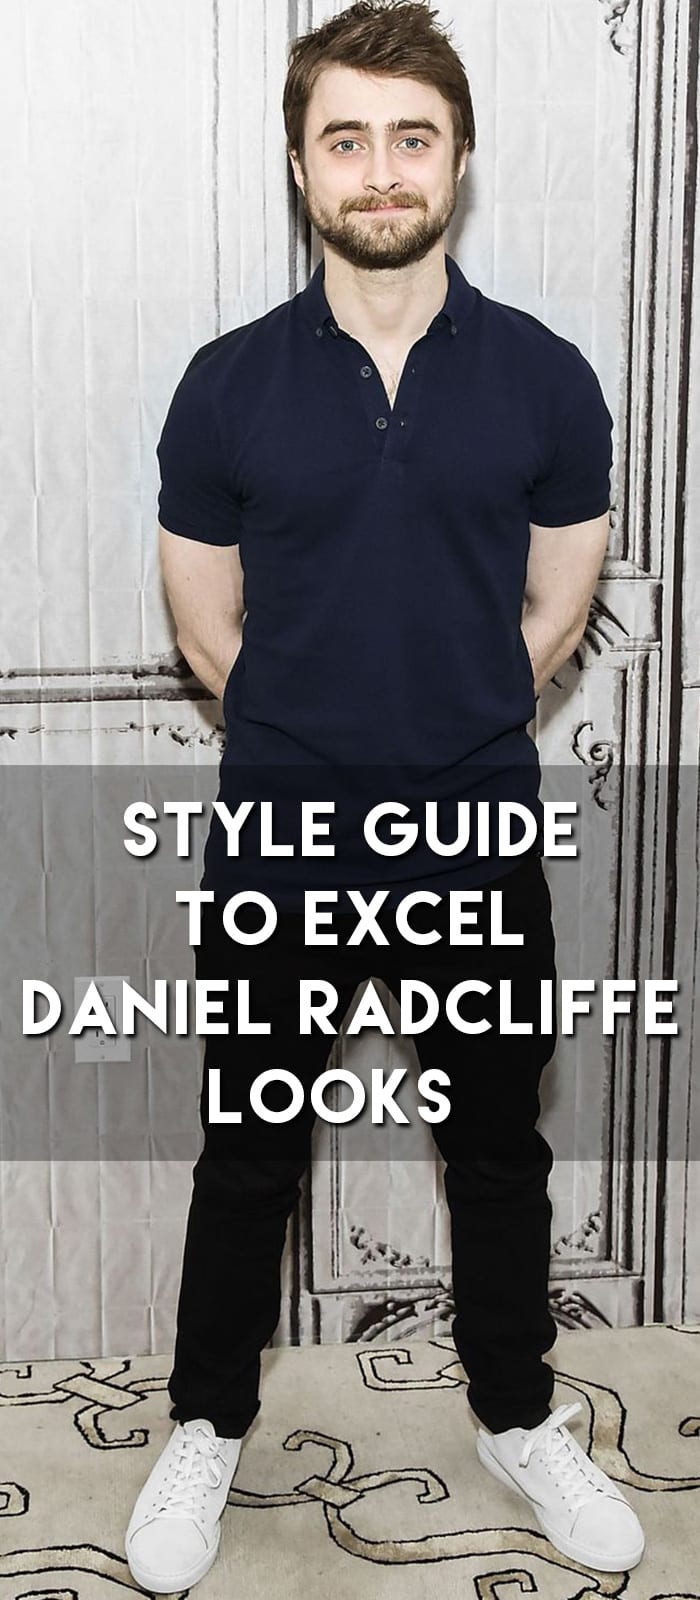 Style Guide To Excel Daniel Radcliffe Looks